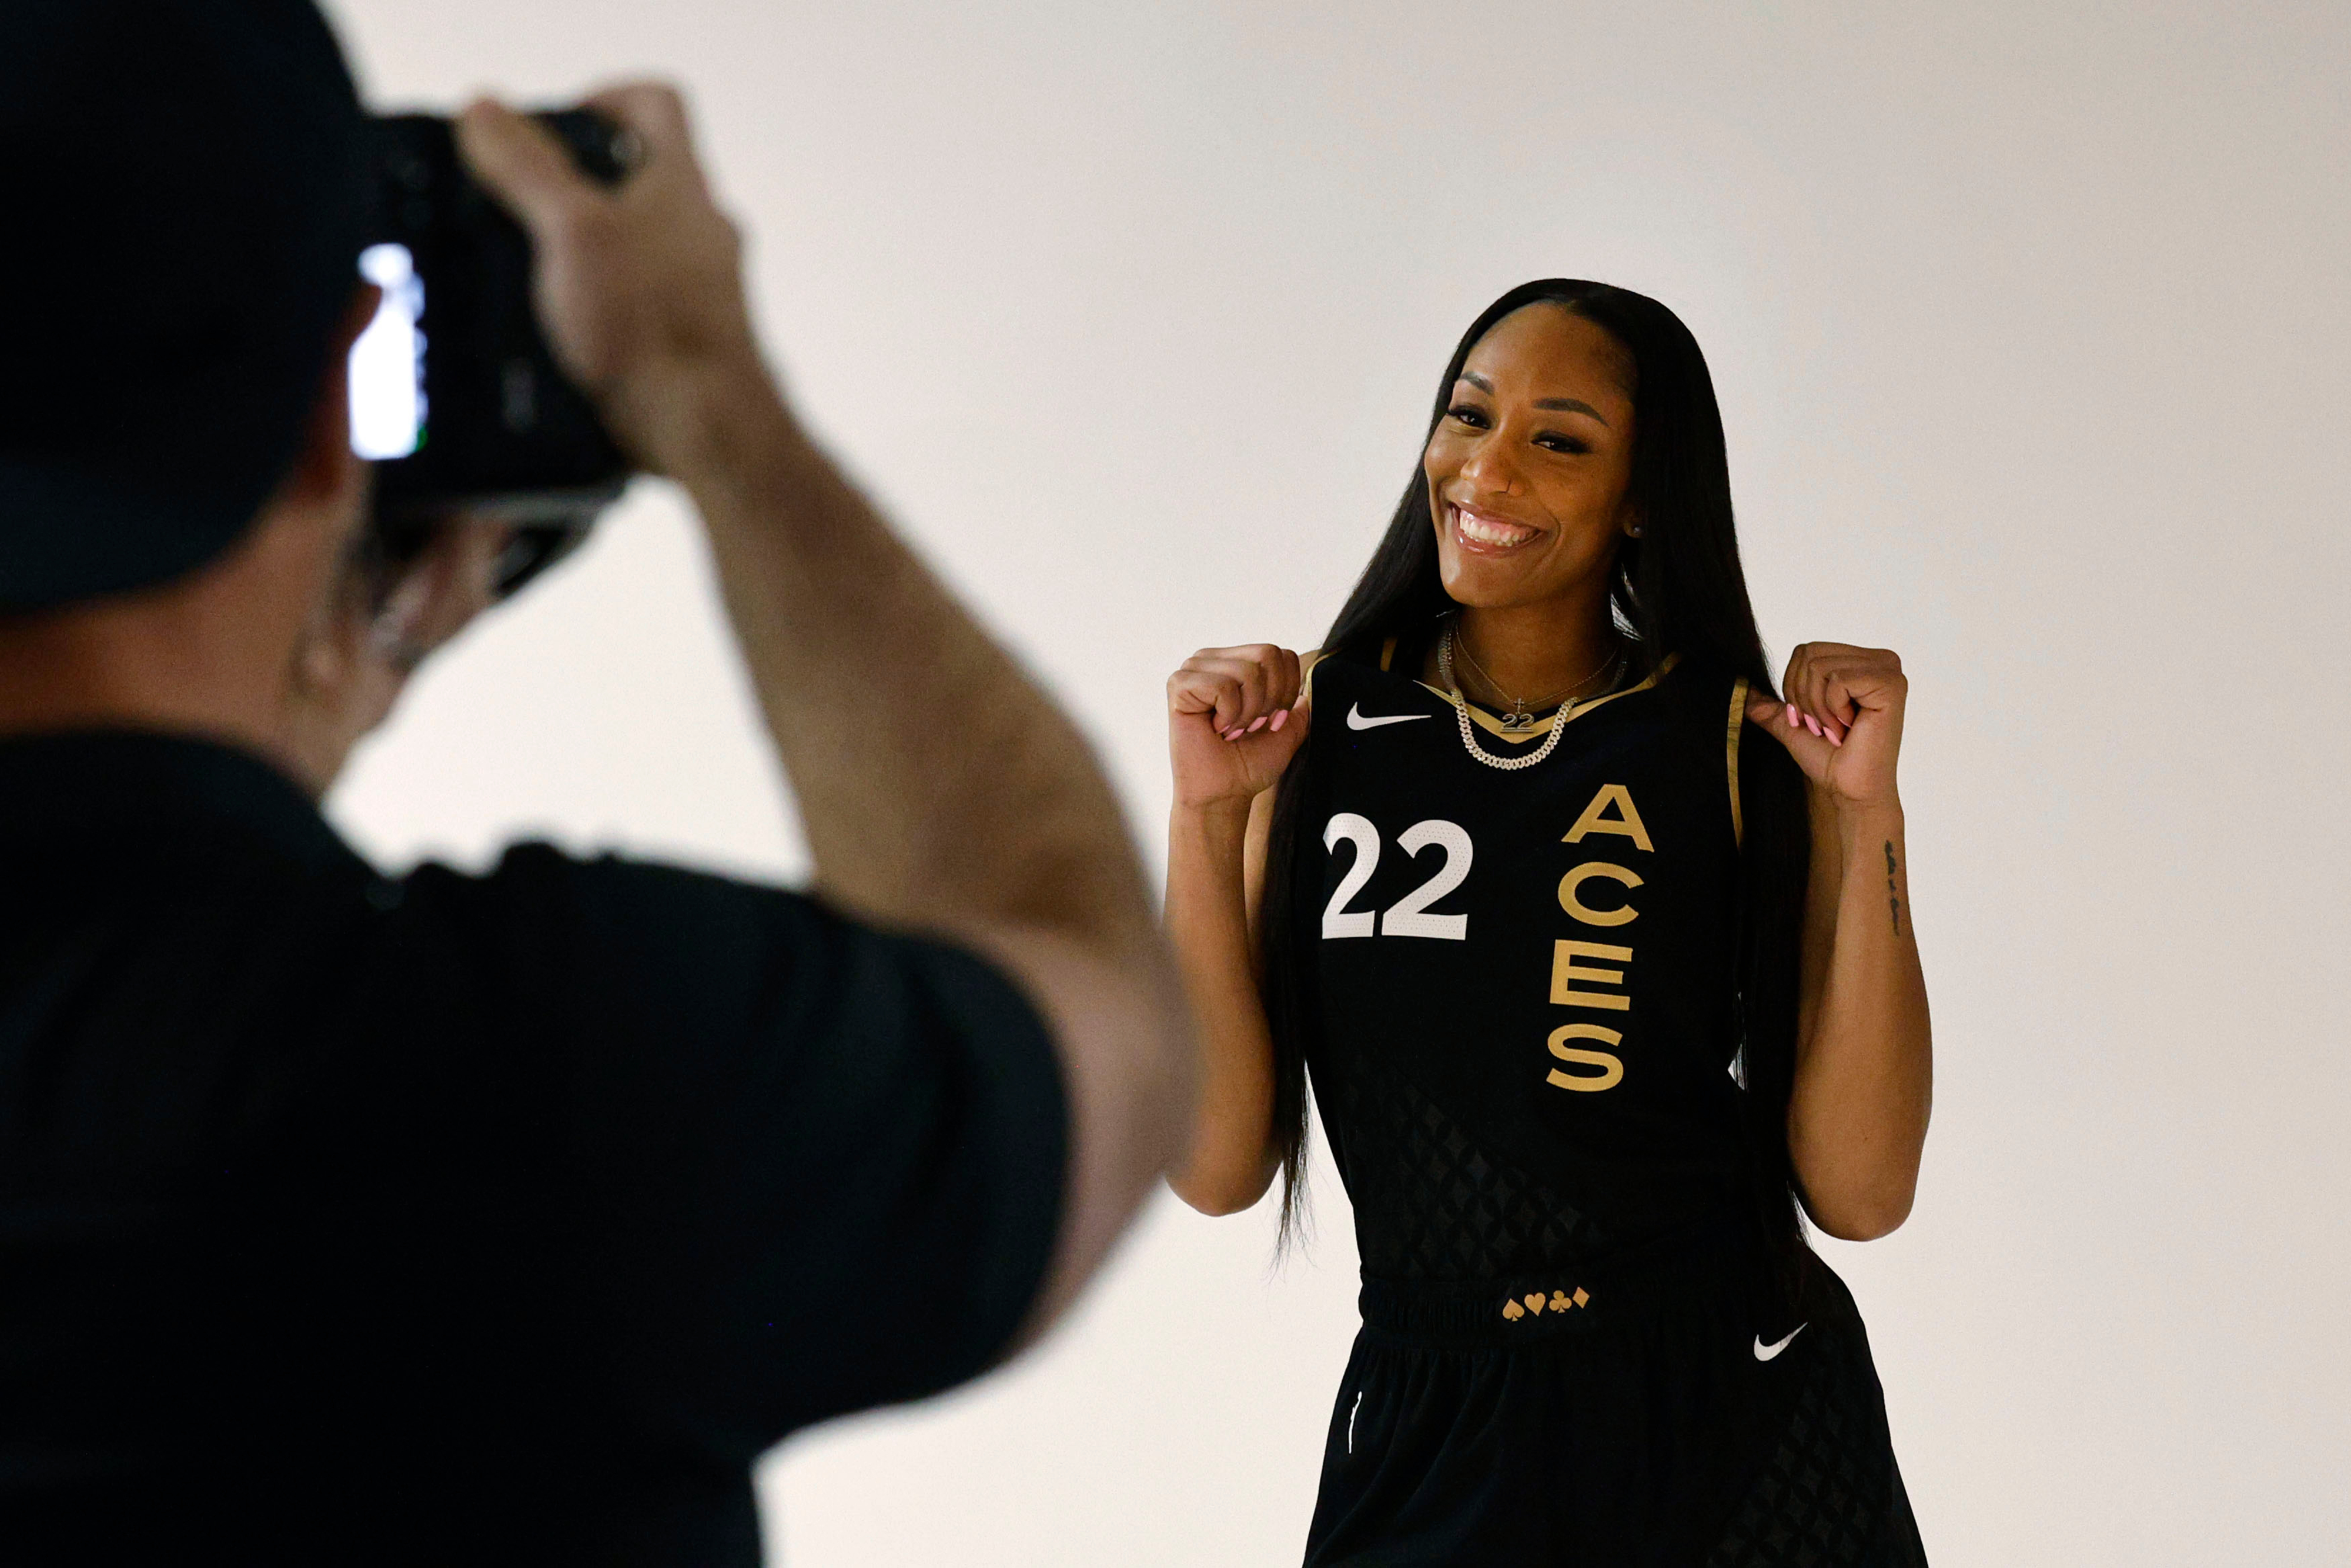 Kierstan Bell remains positive in her role with Las Vegas Aces